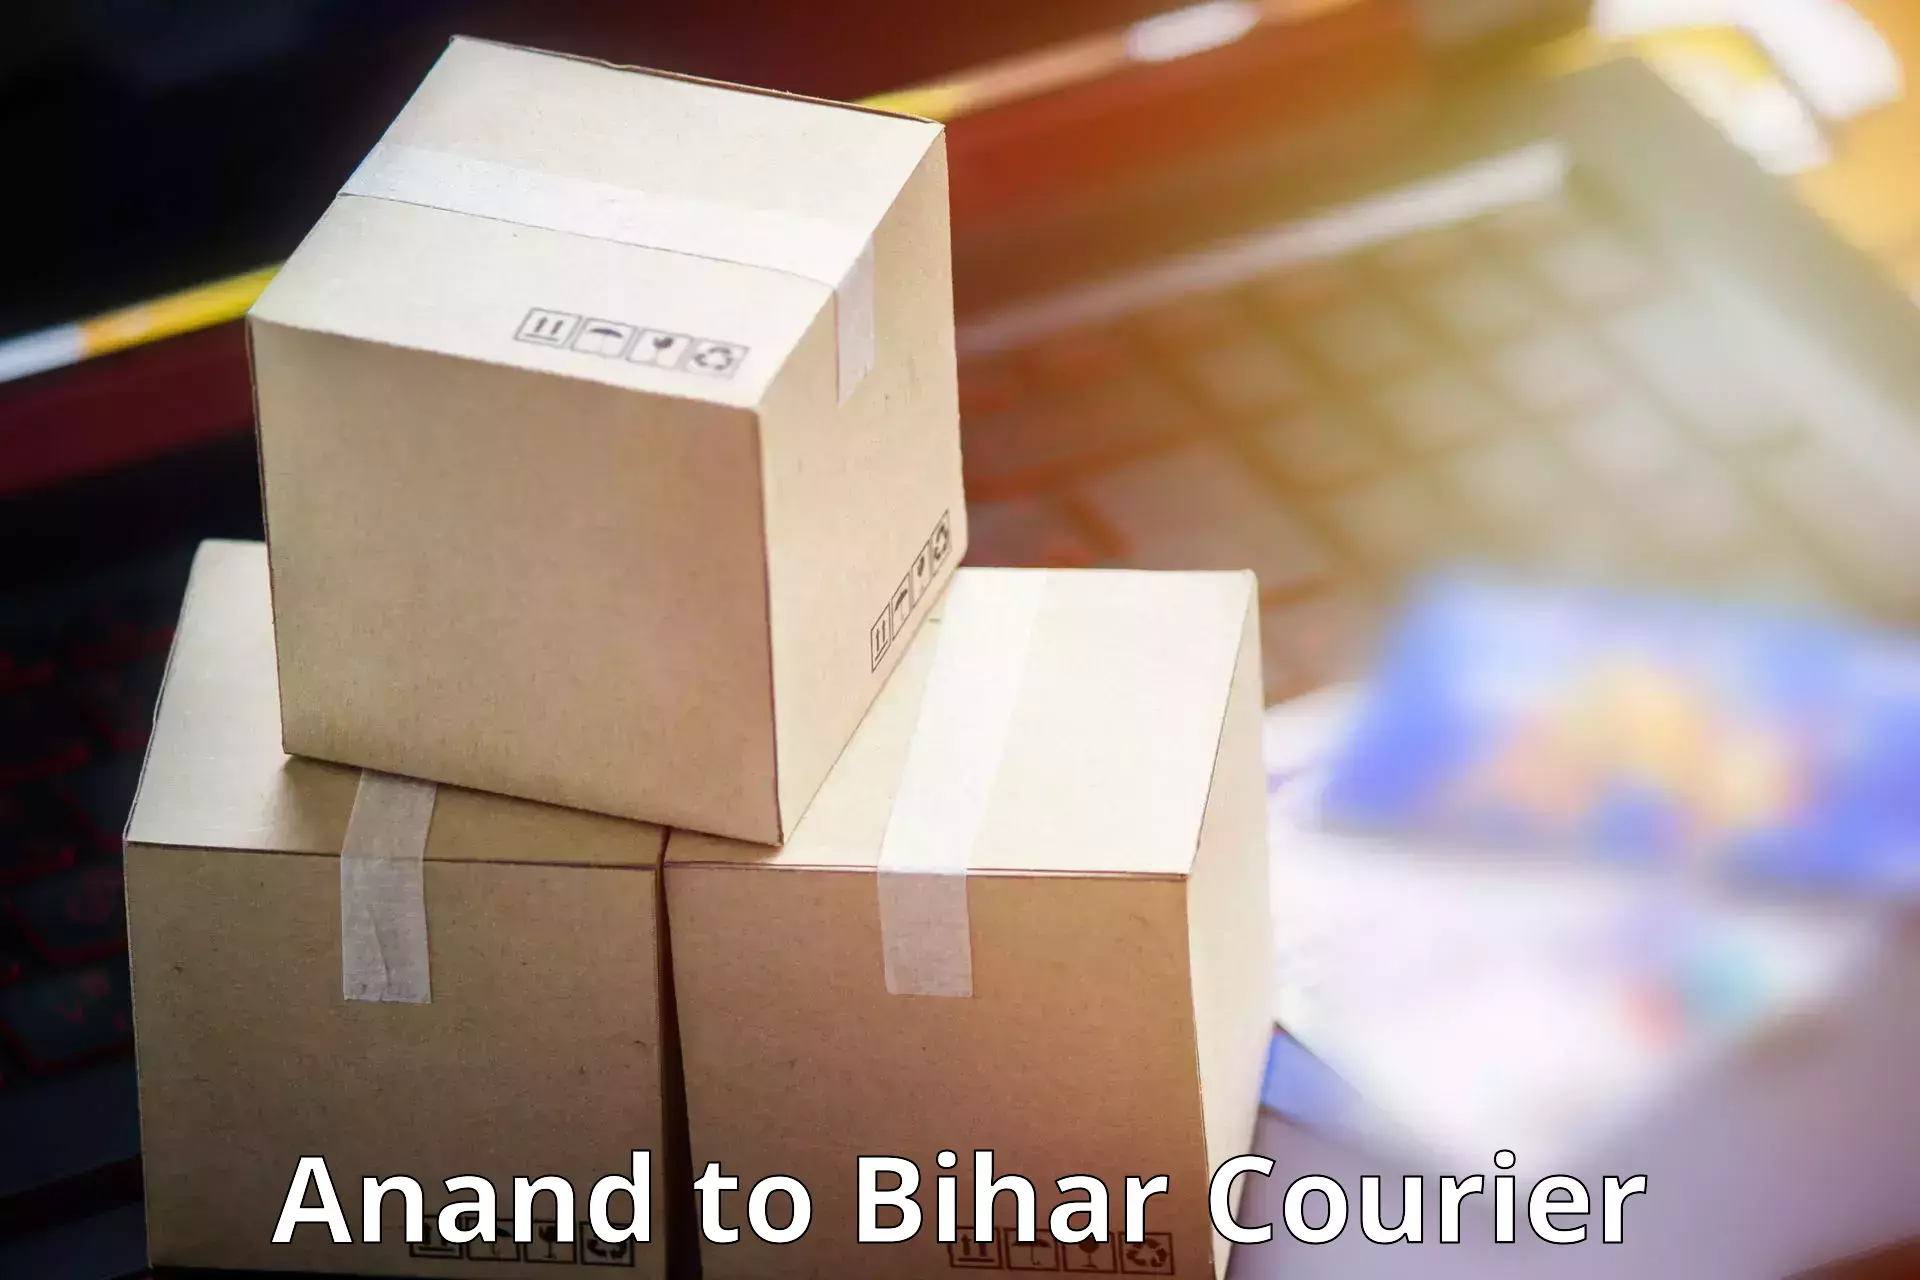 High-capacity parcel service Anand to Samastipur